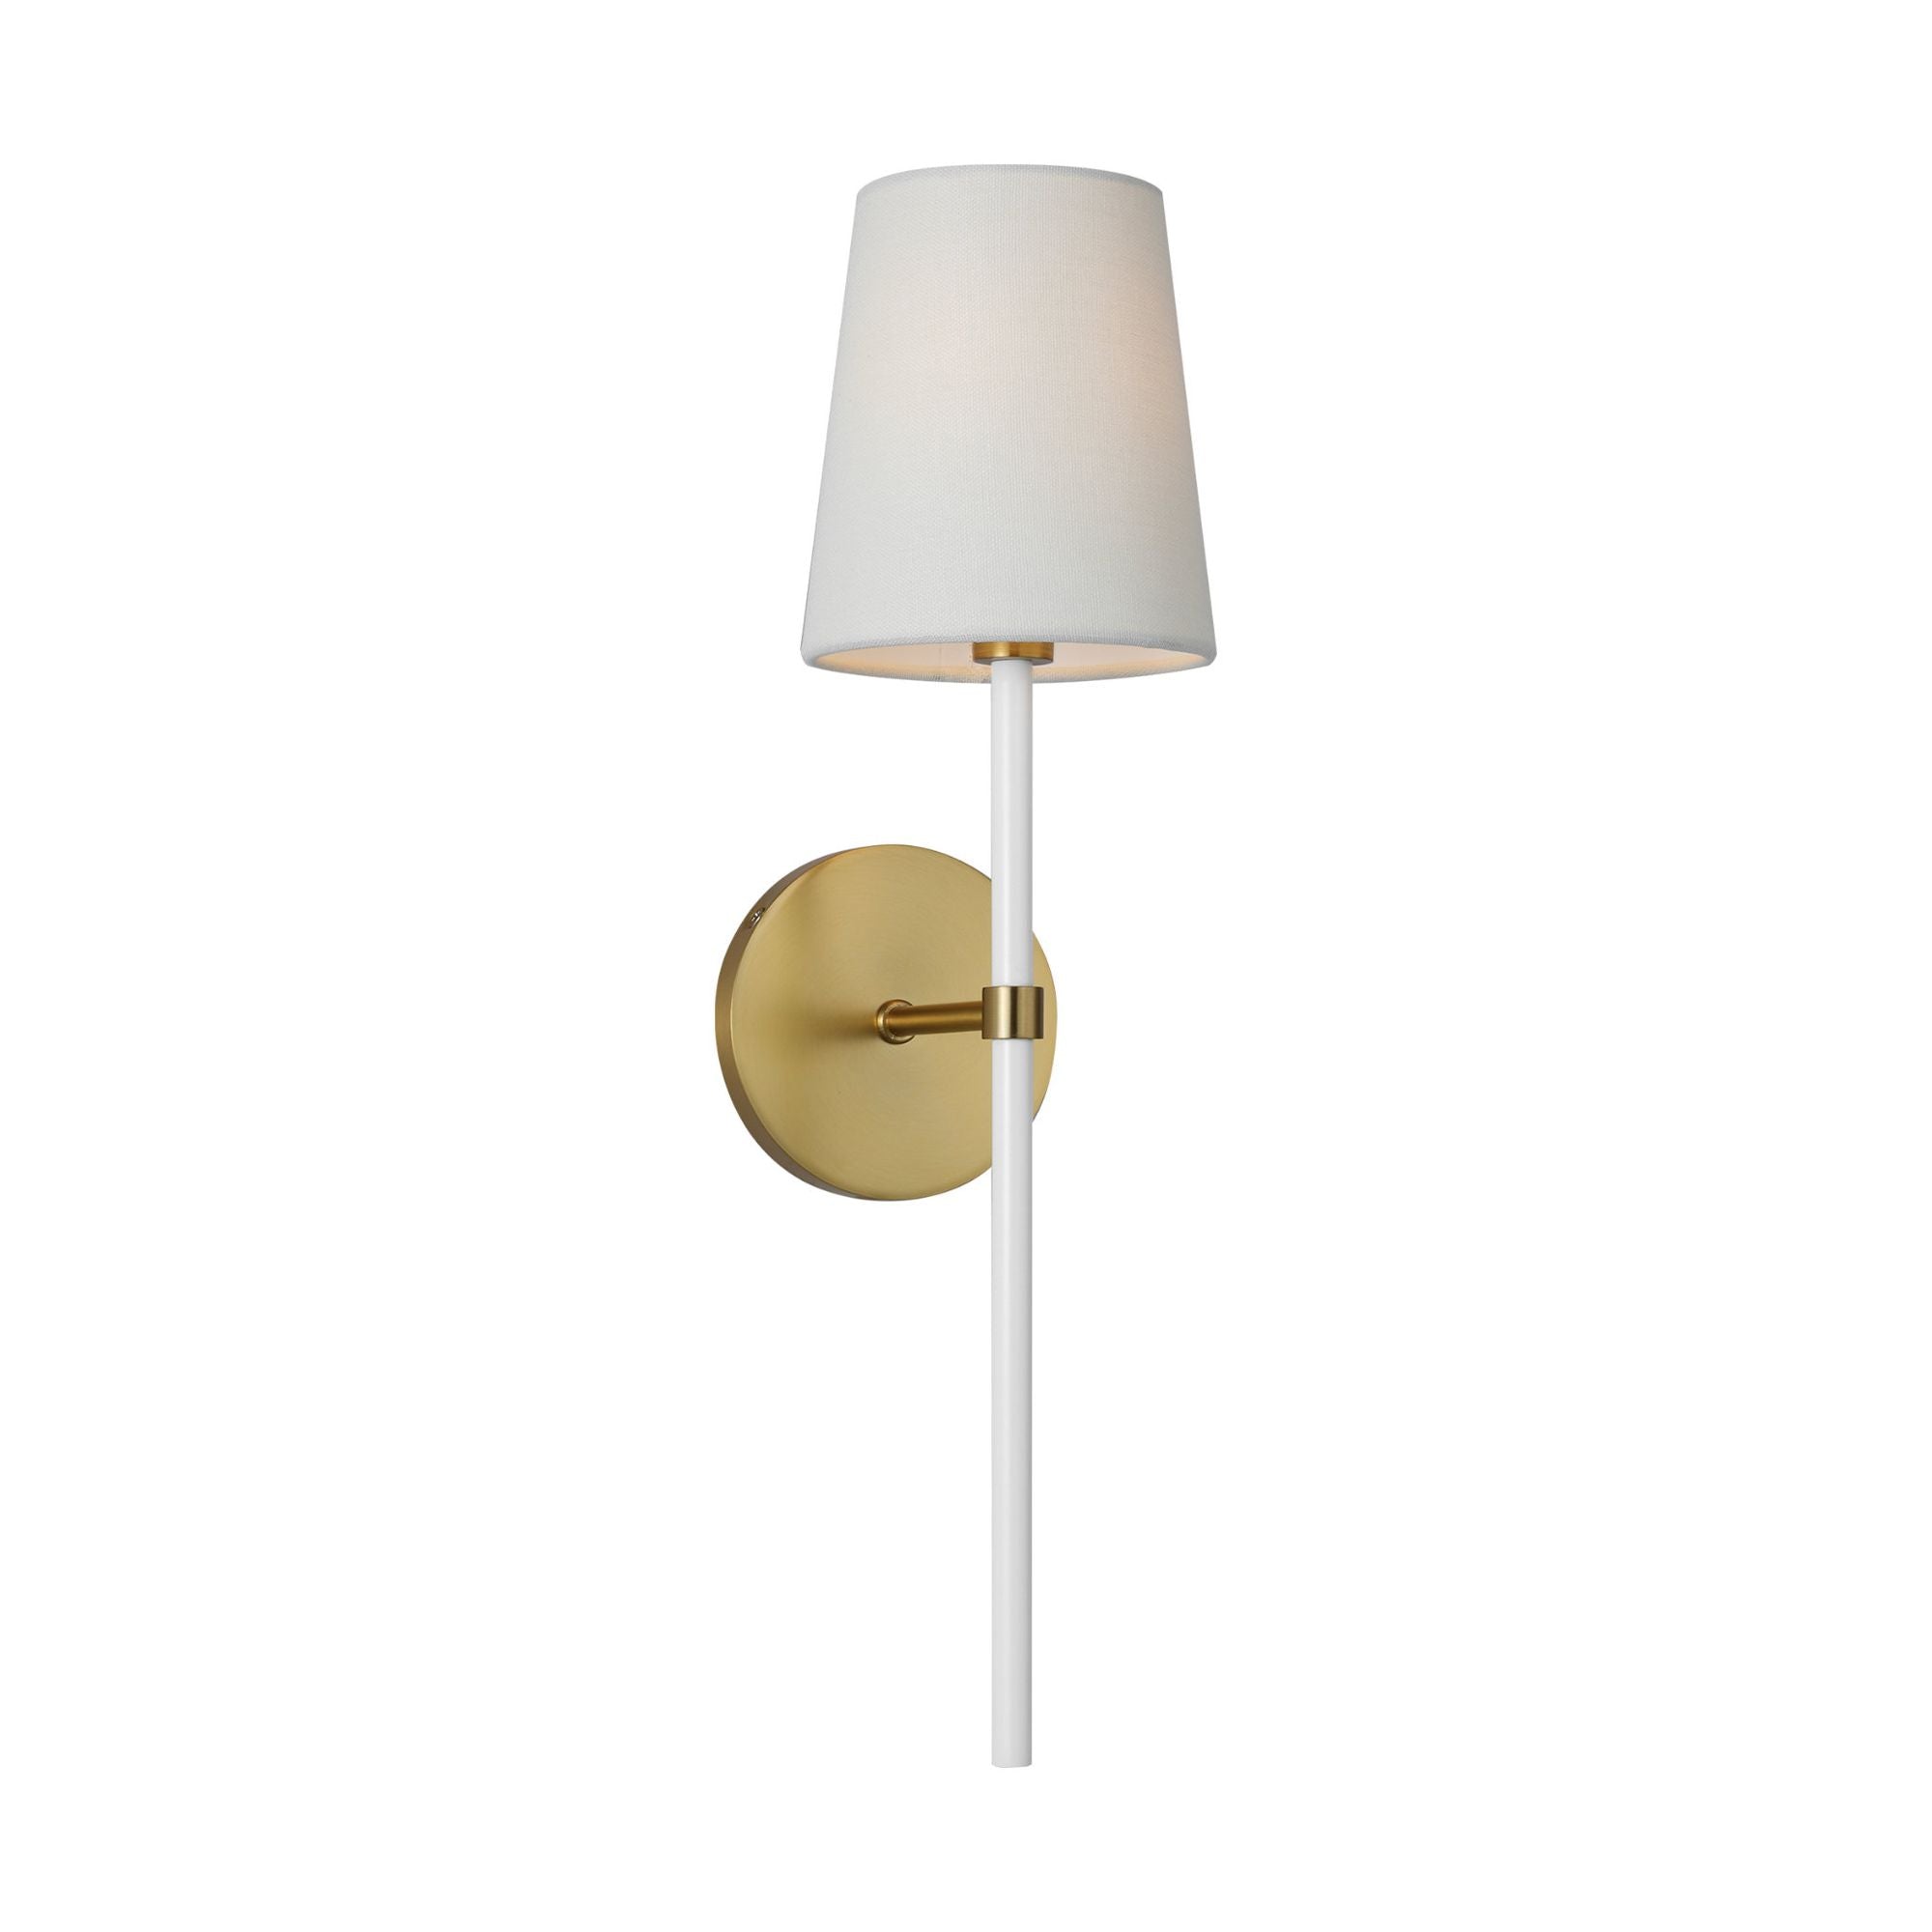 kate spade new york Monroe Tail Sconce in Burnished Brass